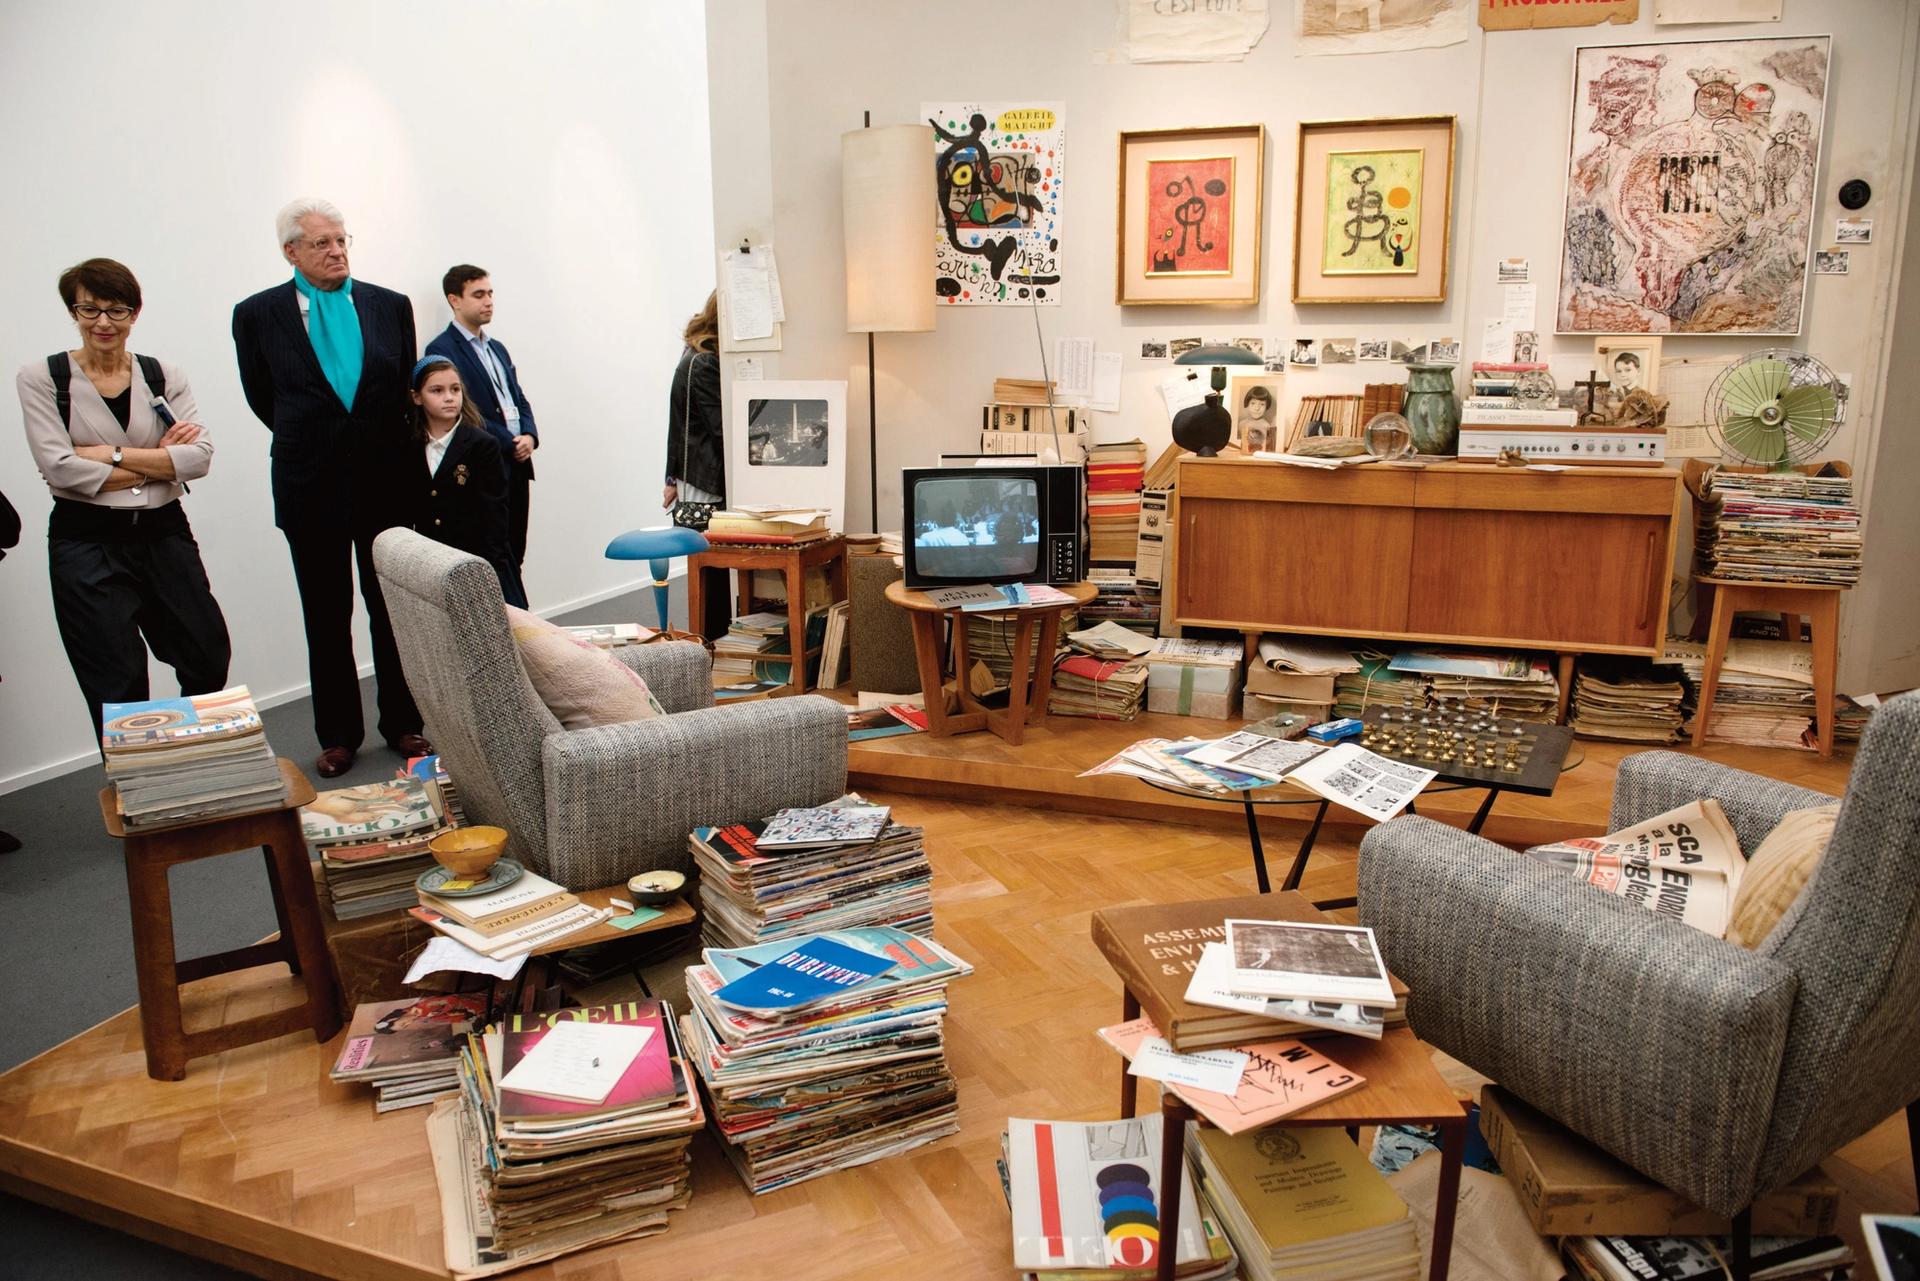 Helly Nahmad’s reimagining of a collector’s cluttered apartment in Paris in 1968 at Frieze Masters 2014 Photo: Linda Nylind; Courtesy of Frieze